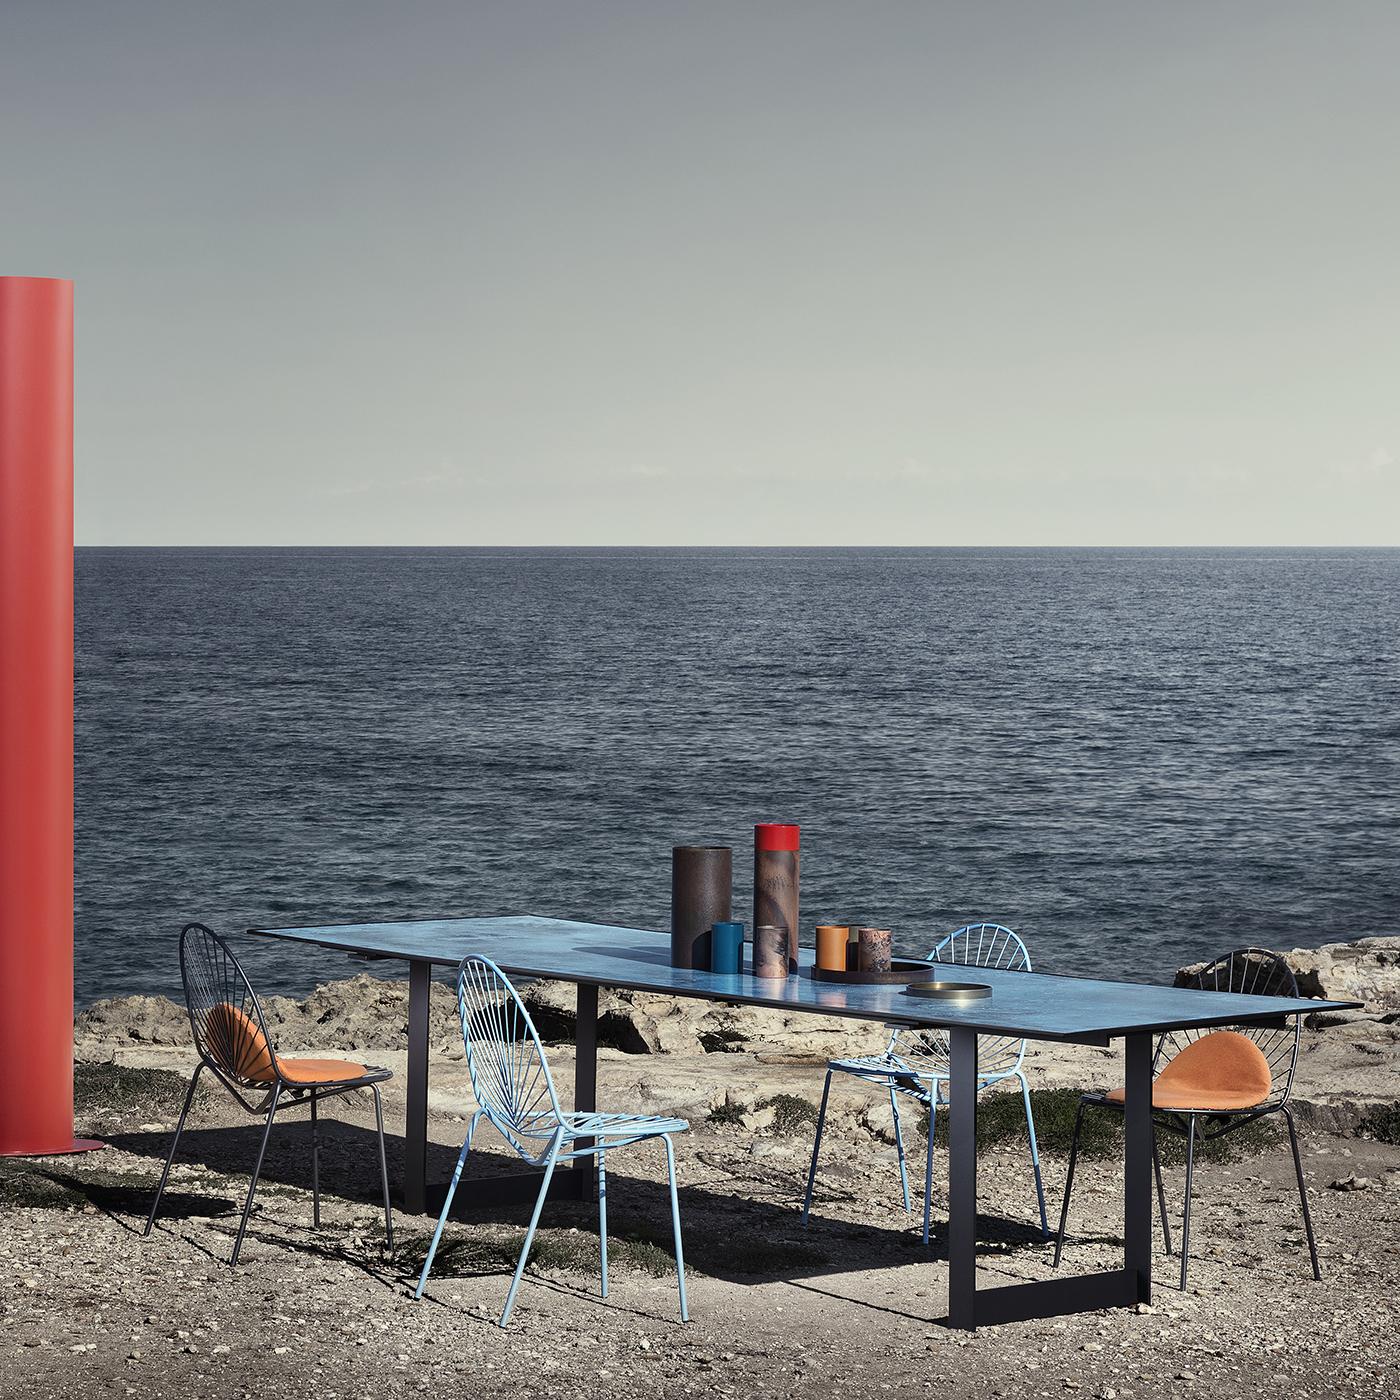 Entirely crafted of steel, this indoor-outdoor dining table boasts a simple and elegant silhouette composed of rectangular legs sustaining a rectangular top made of steel and completed with a sheet of enameled stoneware (5 mm-thick) in a bold